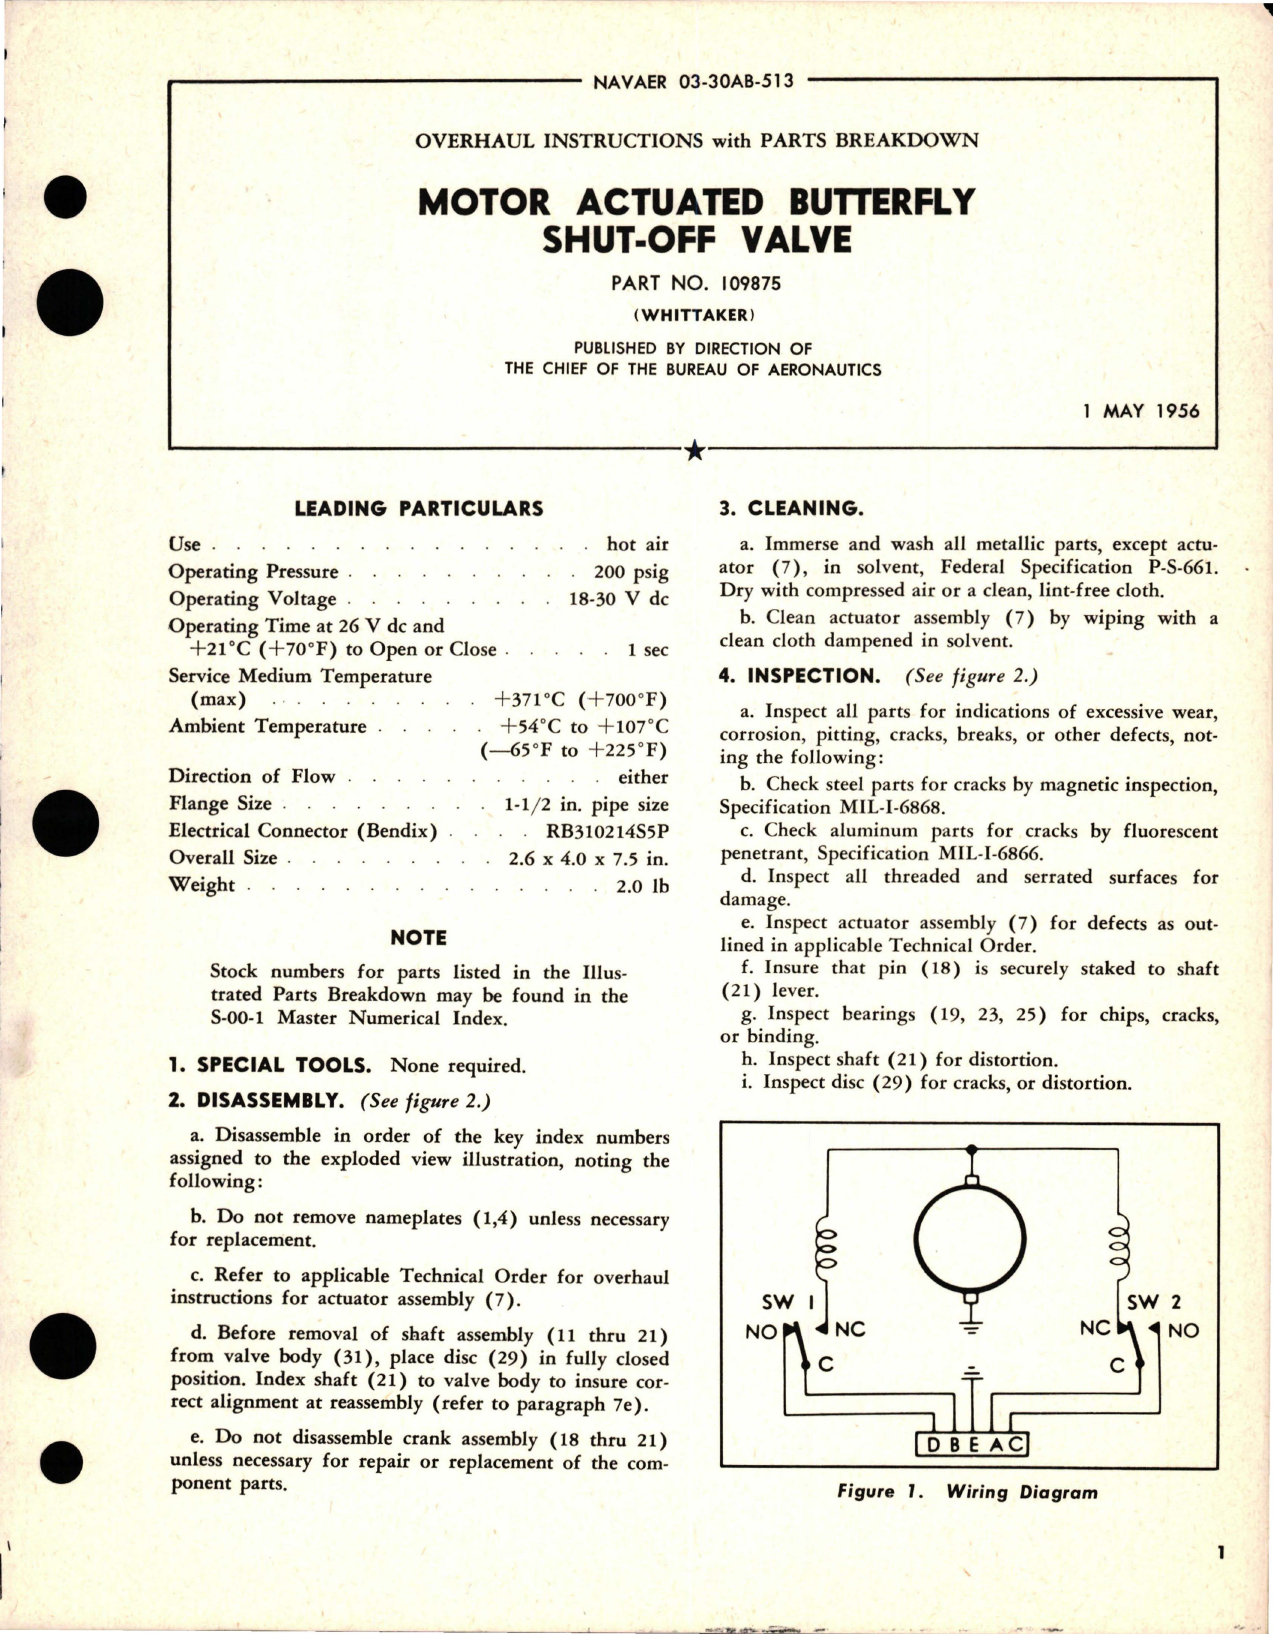 Sample page 1 from AirCorps Library document: Overhaul Instructions with Parts Breakdown for Motor Actuated Butterfly Shut-Off Valve - Part 109875 